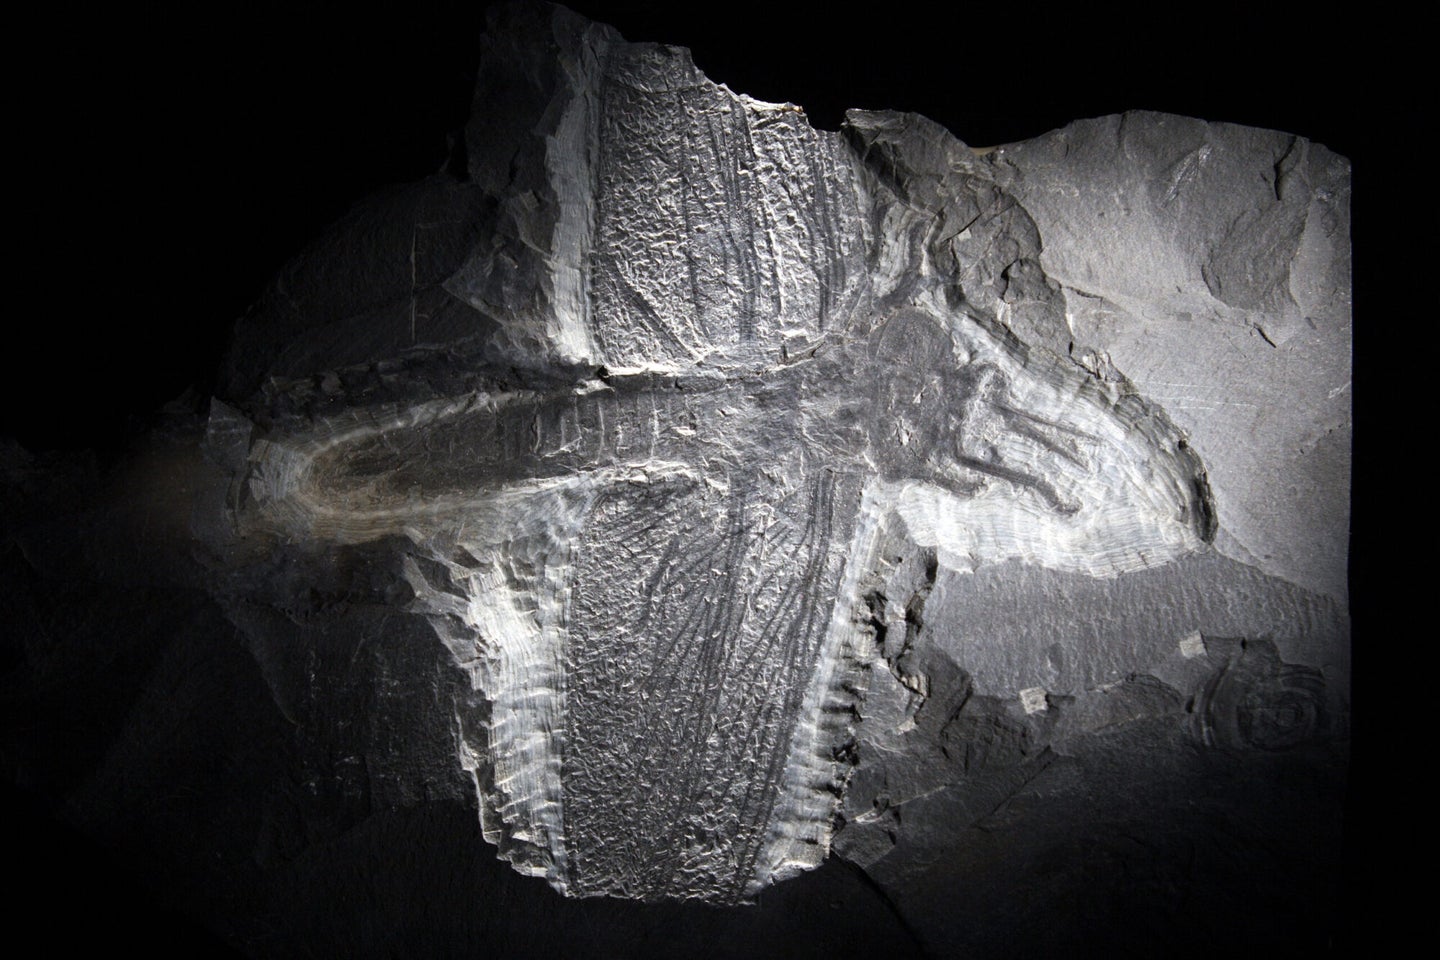 A winged insect fossil in rock is about 300 million years old, a fossil example of an early animal to take flight.